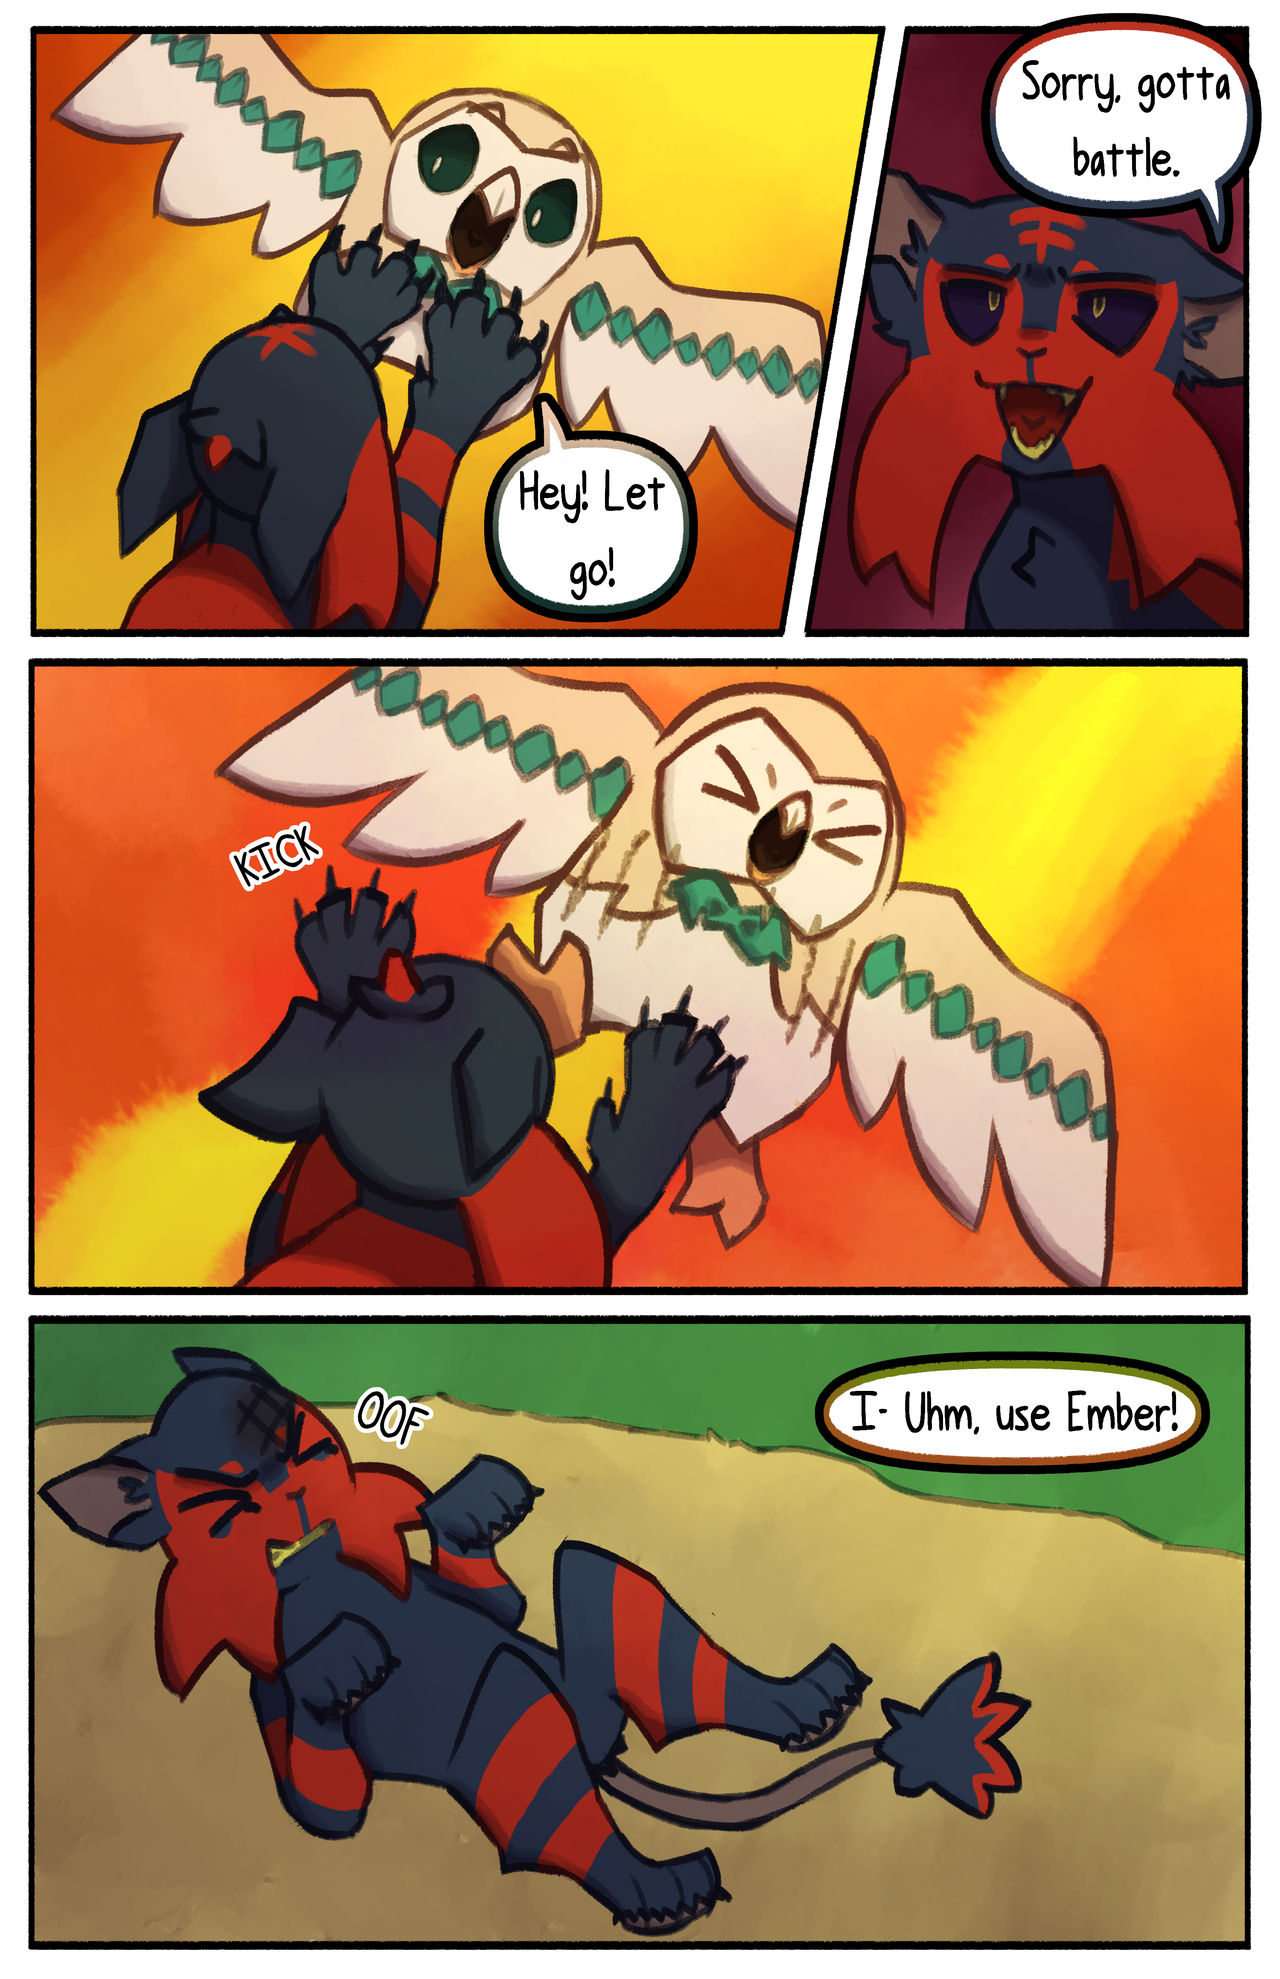 bloom__an_ultra_moon_nuzlocke___chapter_1__page_25_by_zombie_zcorge_df88i1w-fullview.jpg